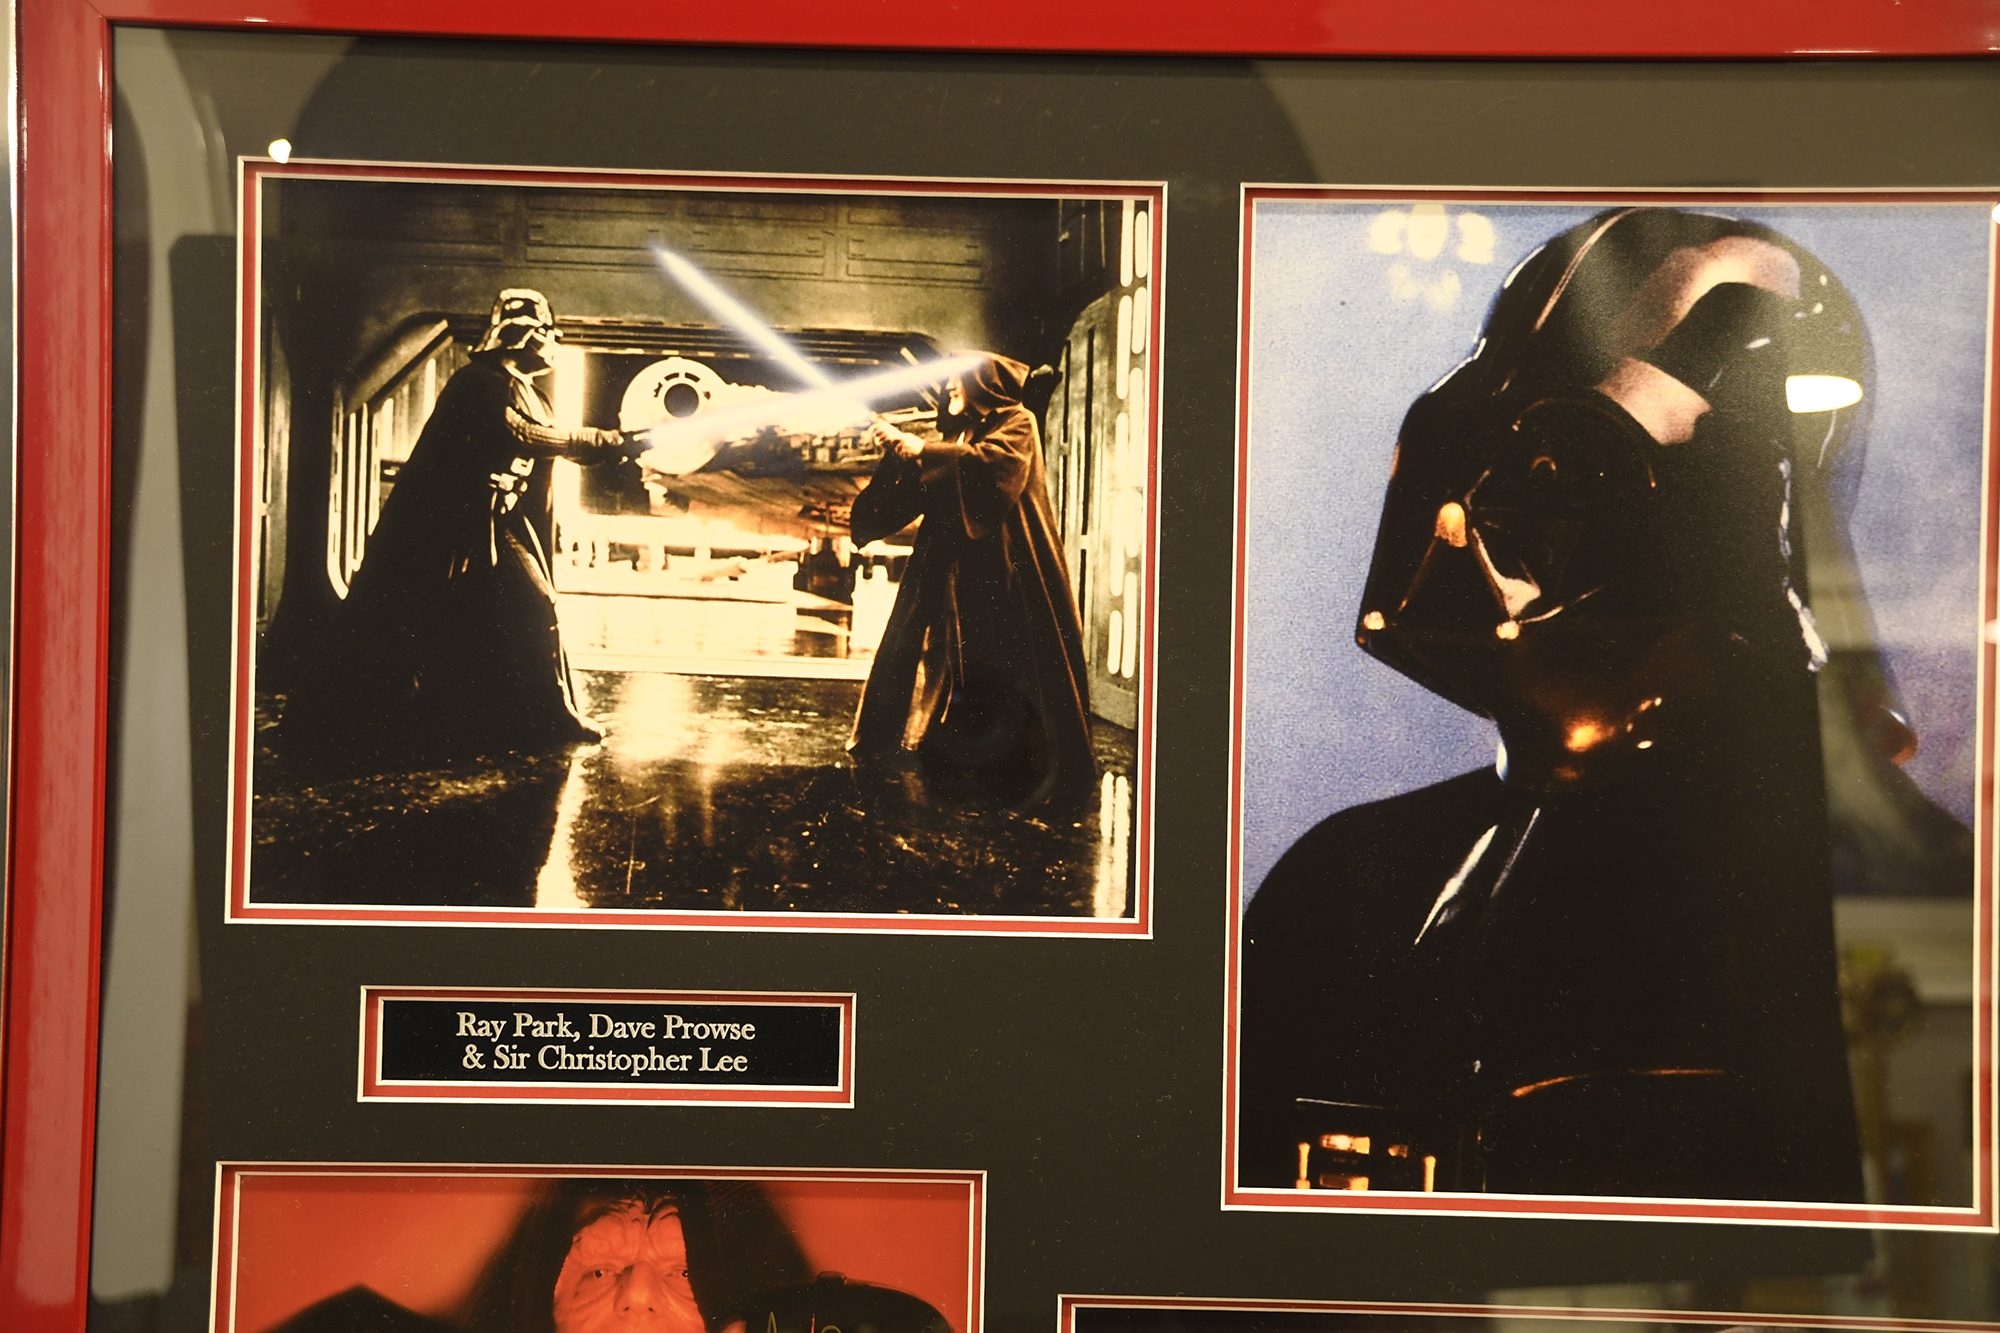 Signed Star Wars Photograph - Image 2 of 5